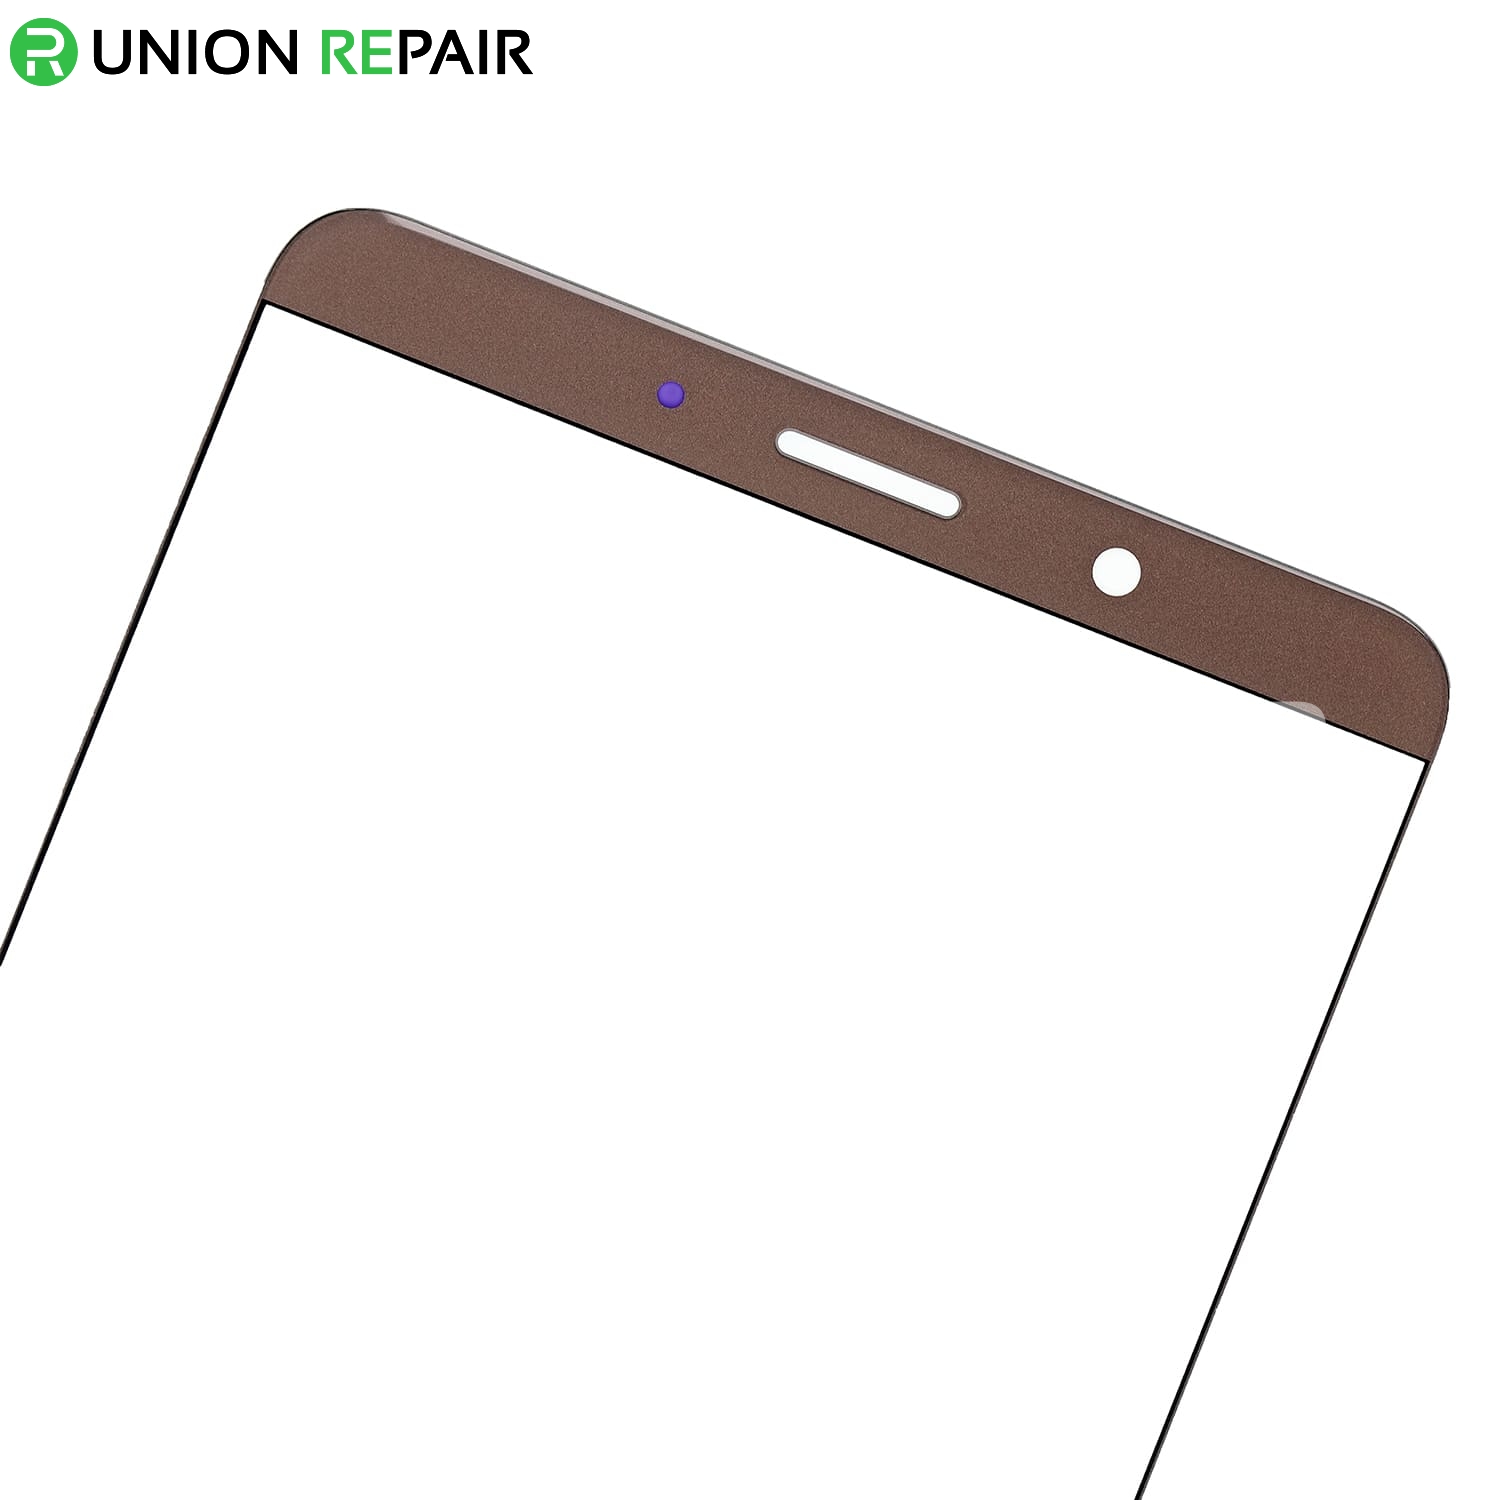 Replacement for Huawei Mate 10 Front Glass - Mocha Brown